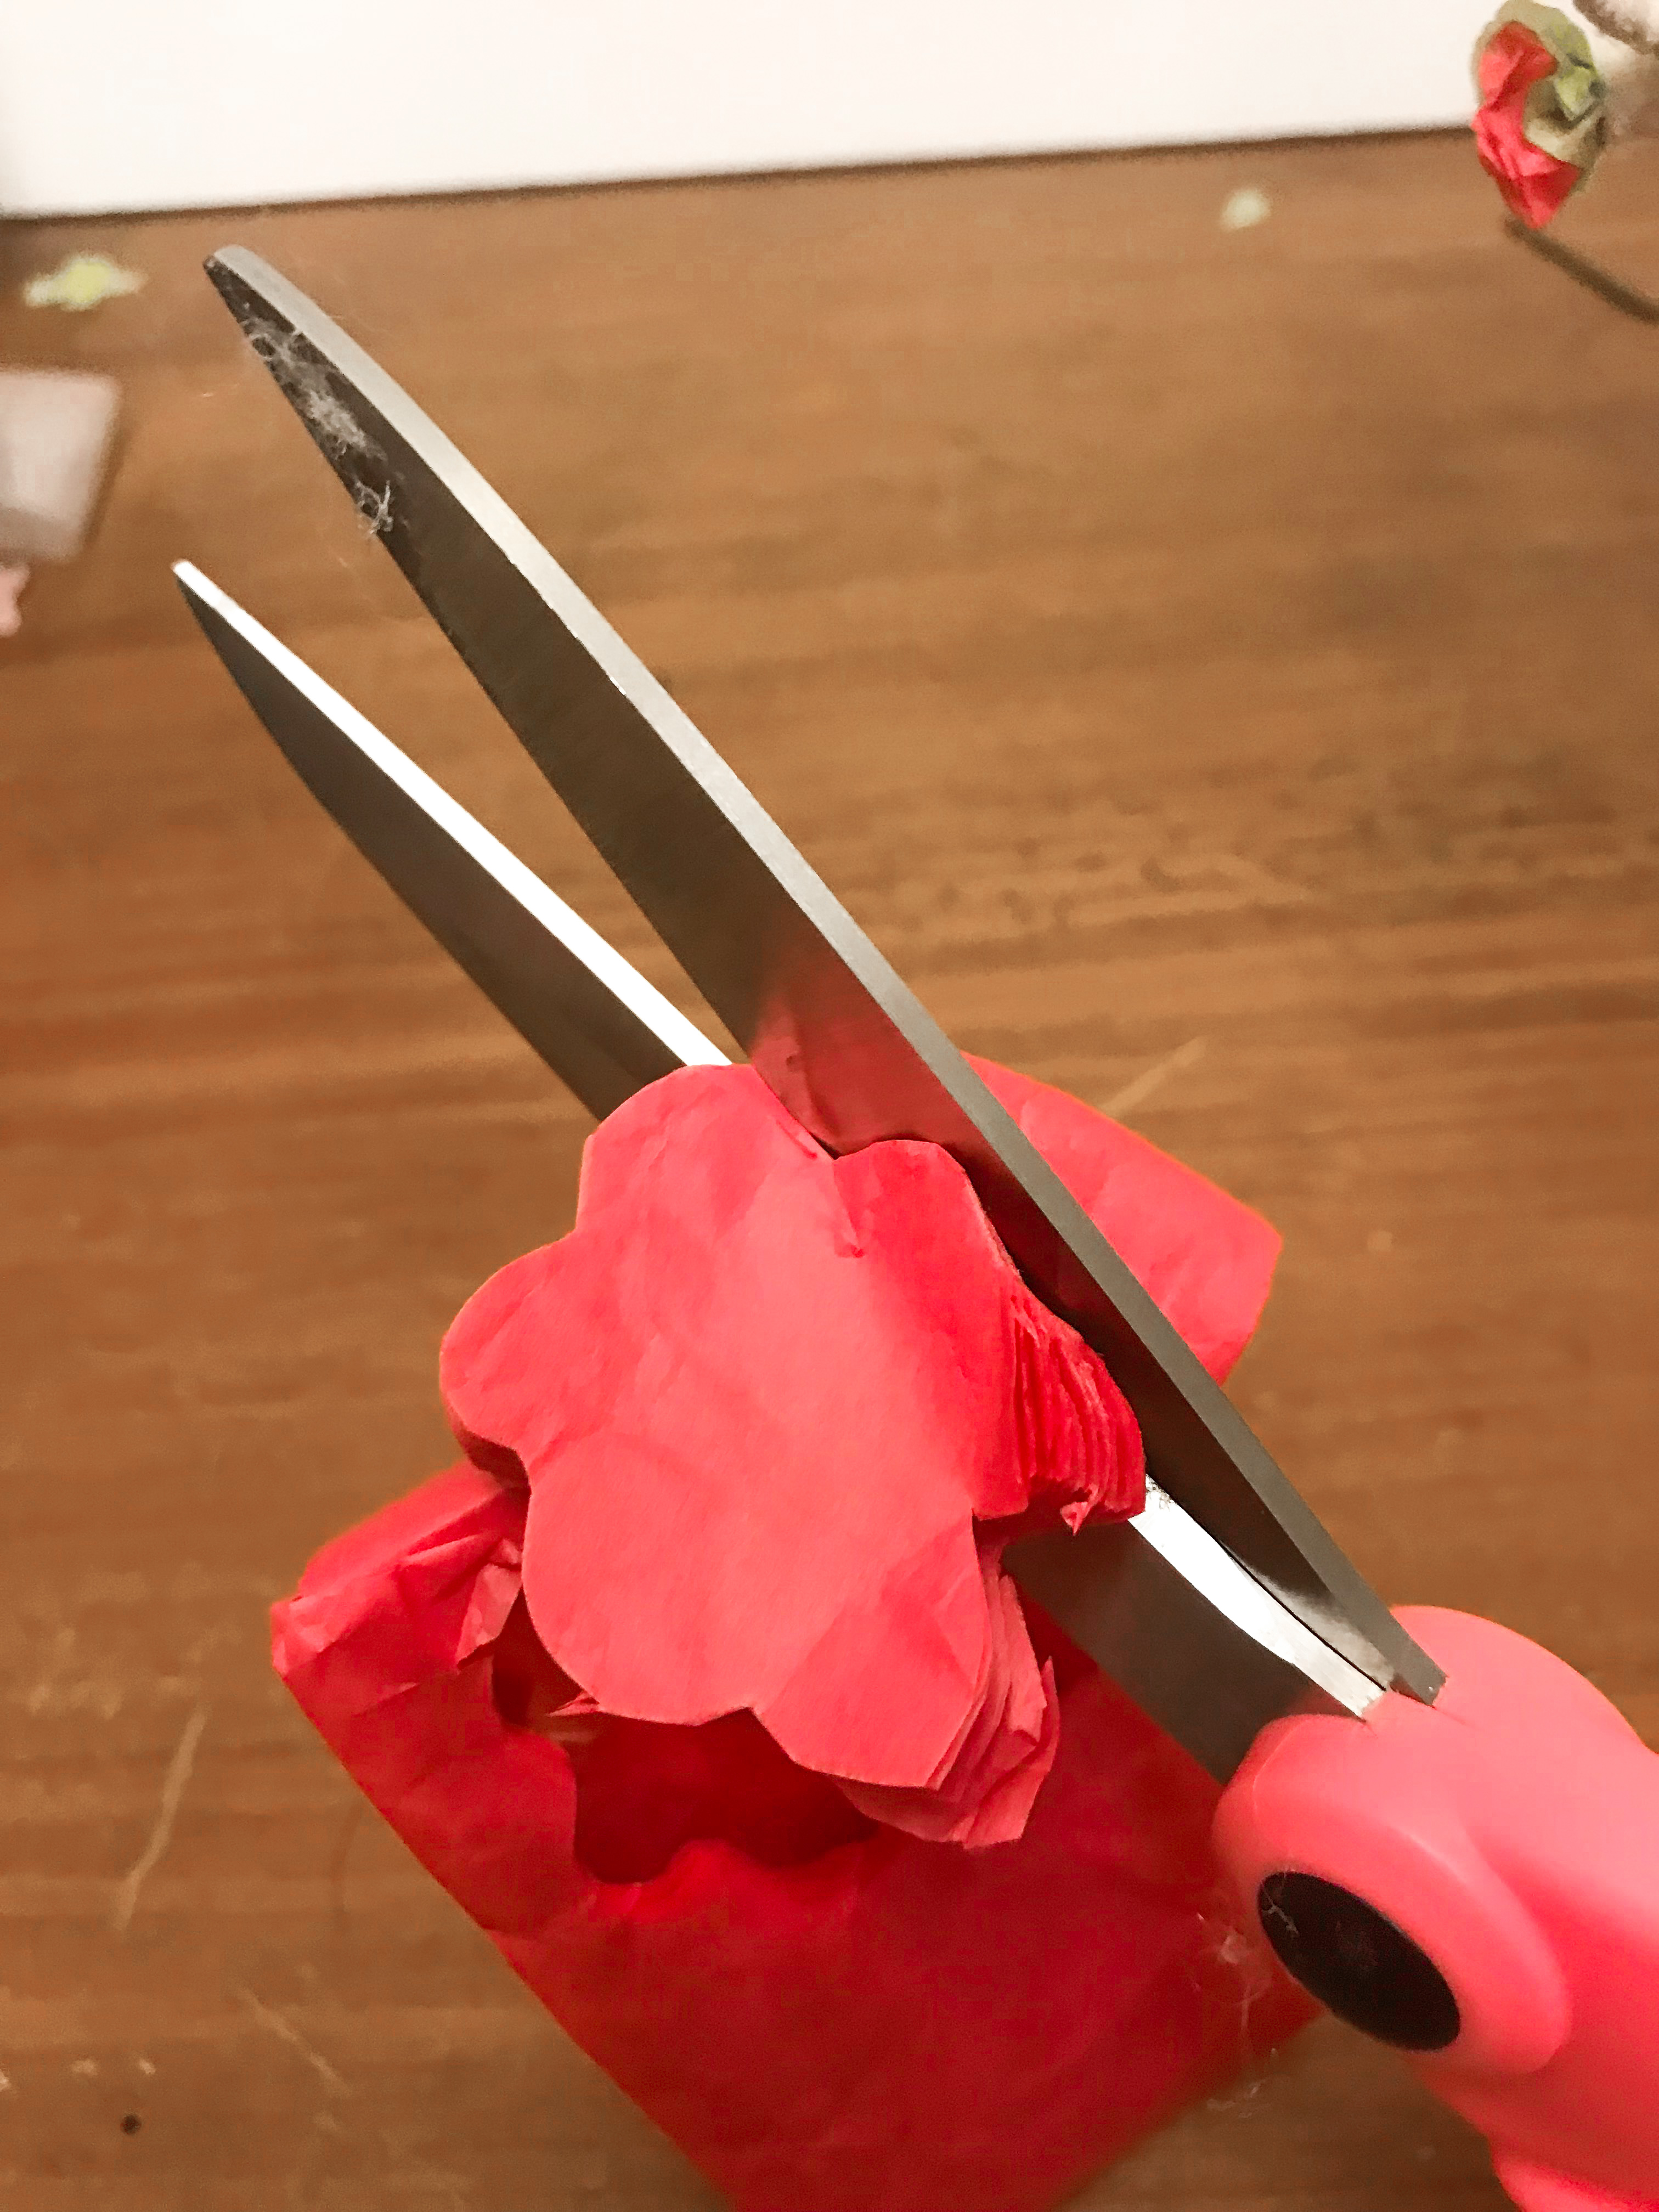 Pink scissors cutting out 6 petaled flower shape from hot pink folded tissue paper